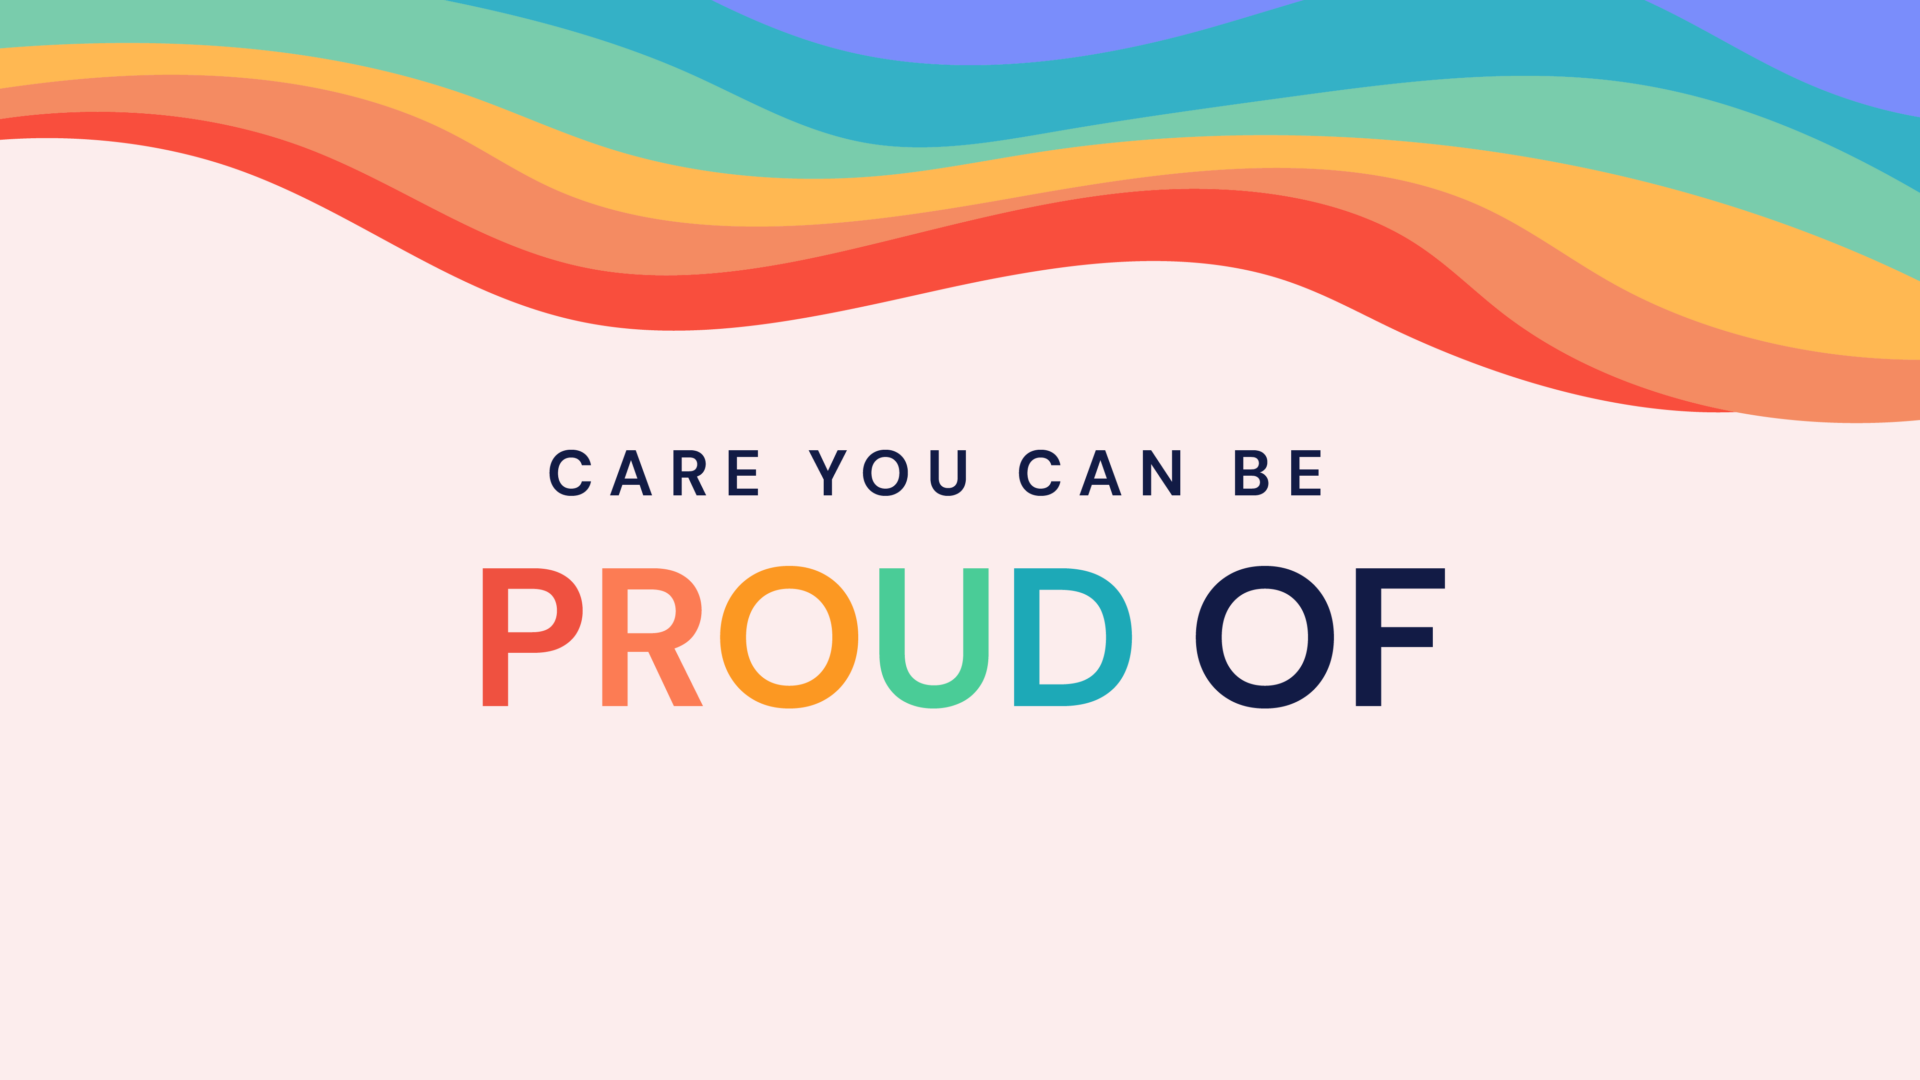 Care You Can Be Proud Of